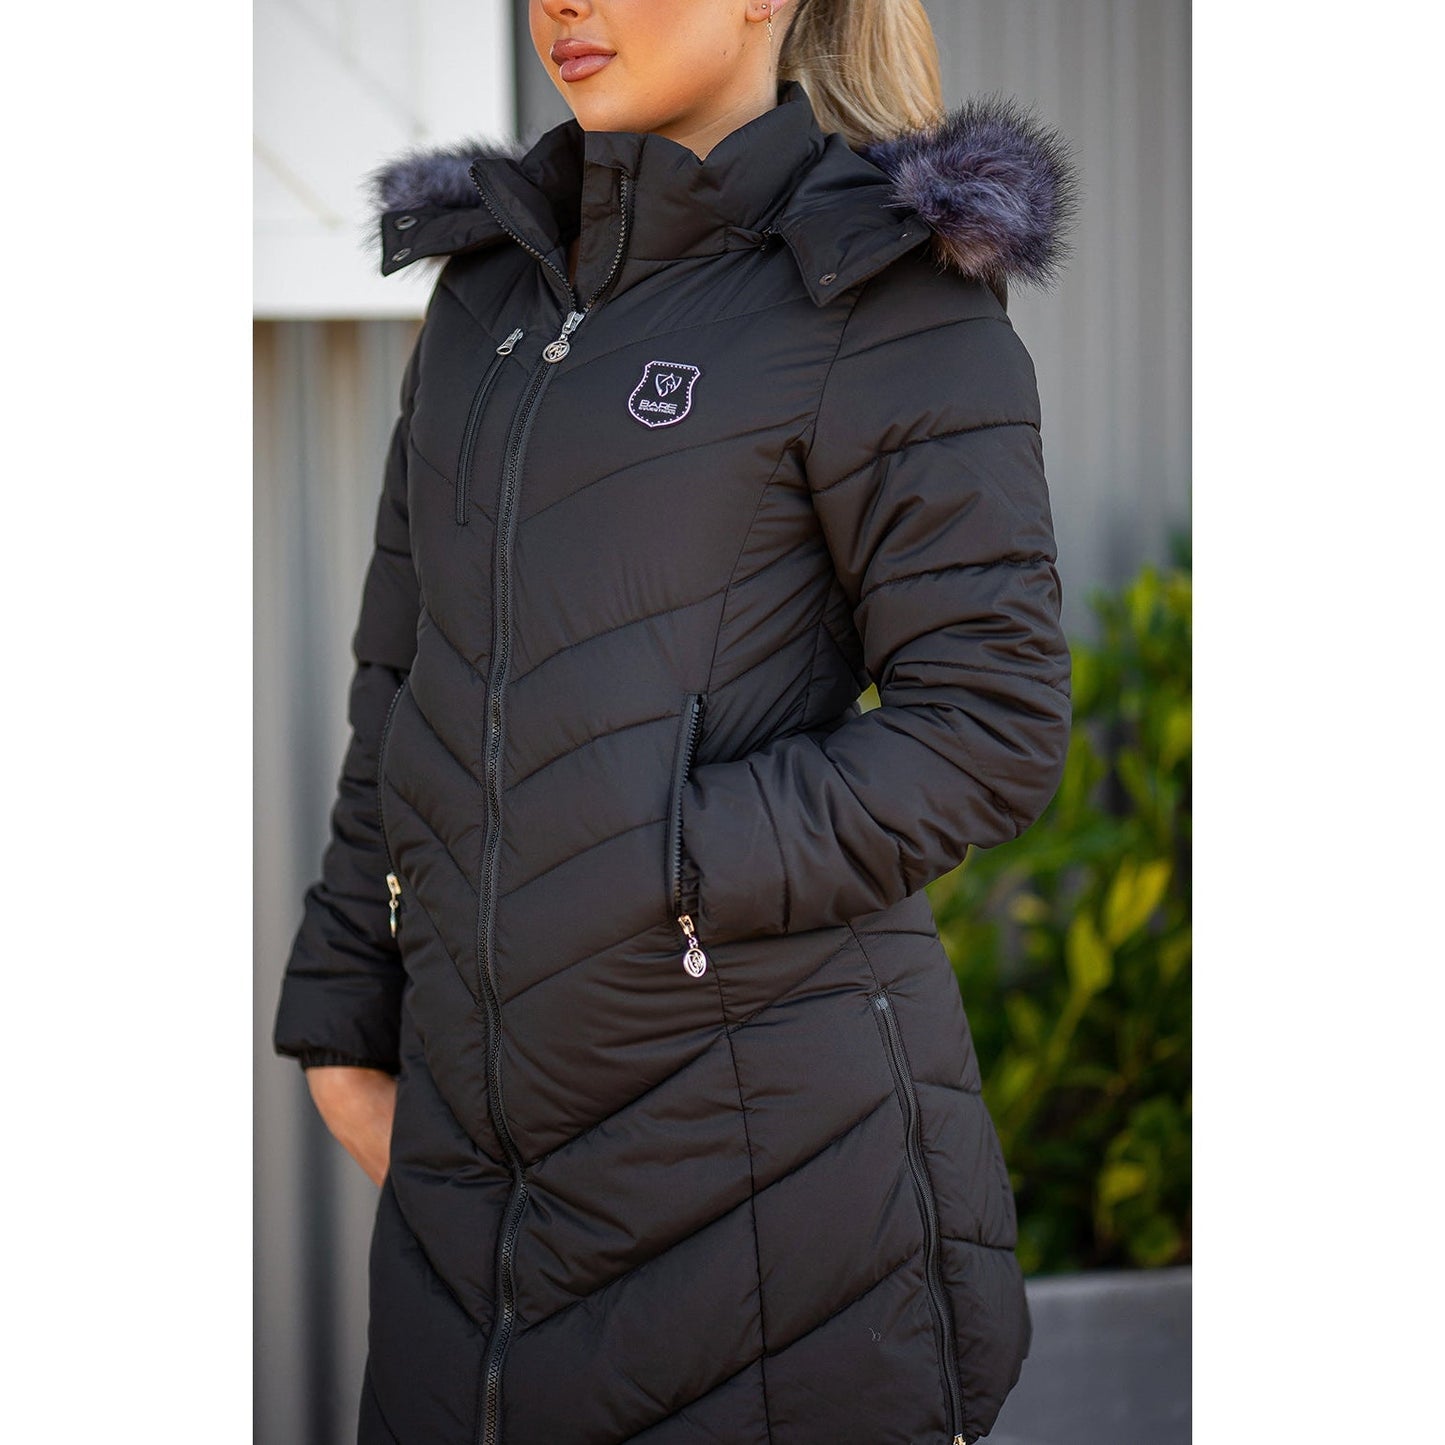 BARE Equestrian Winter Series - Hollie Long Jacket-Southern Sport Horses-The Equestrian